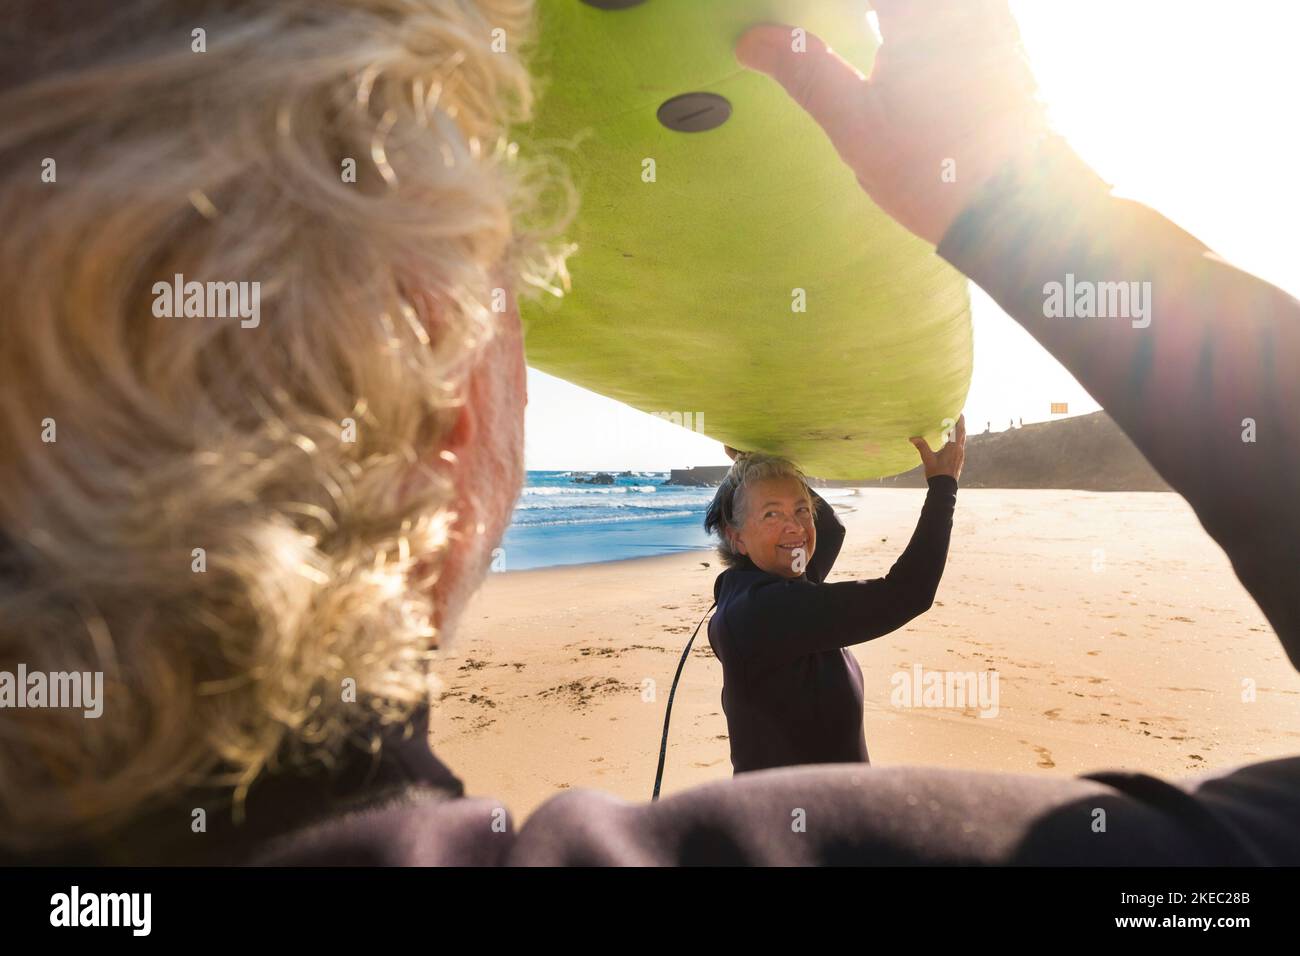 couple of mature and old people or seniors surfing together in the beach with a big surfboard. Two seniors having fun and enjoying summer doing water sports outdoor Stock Photo